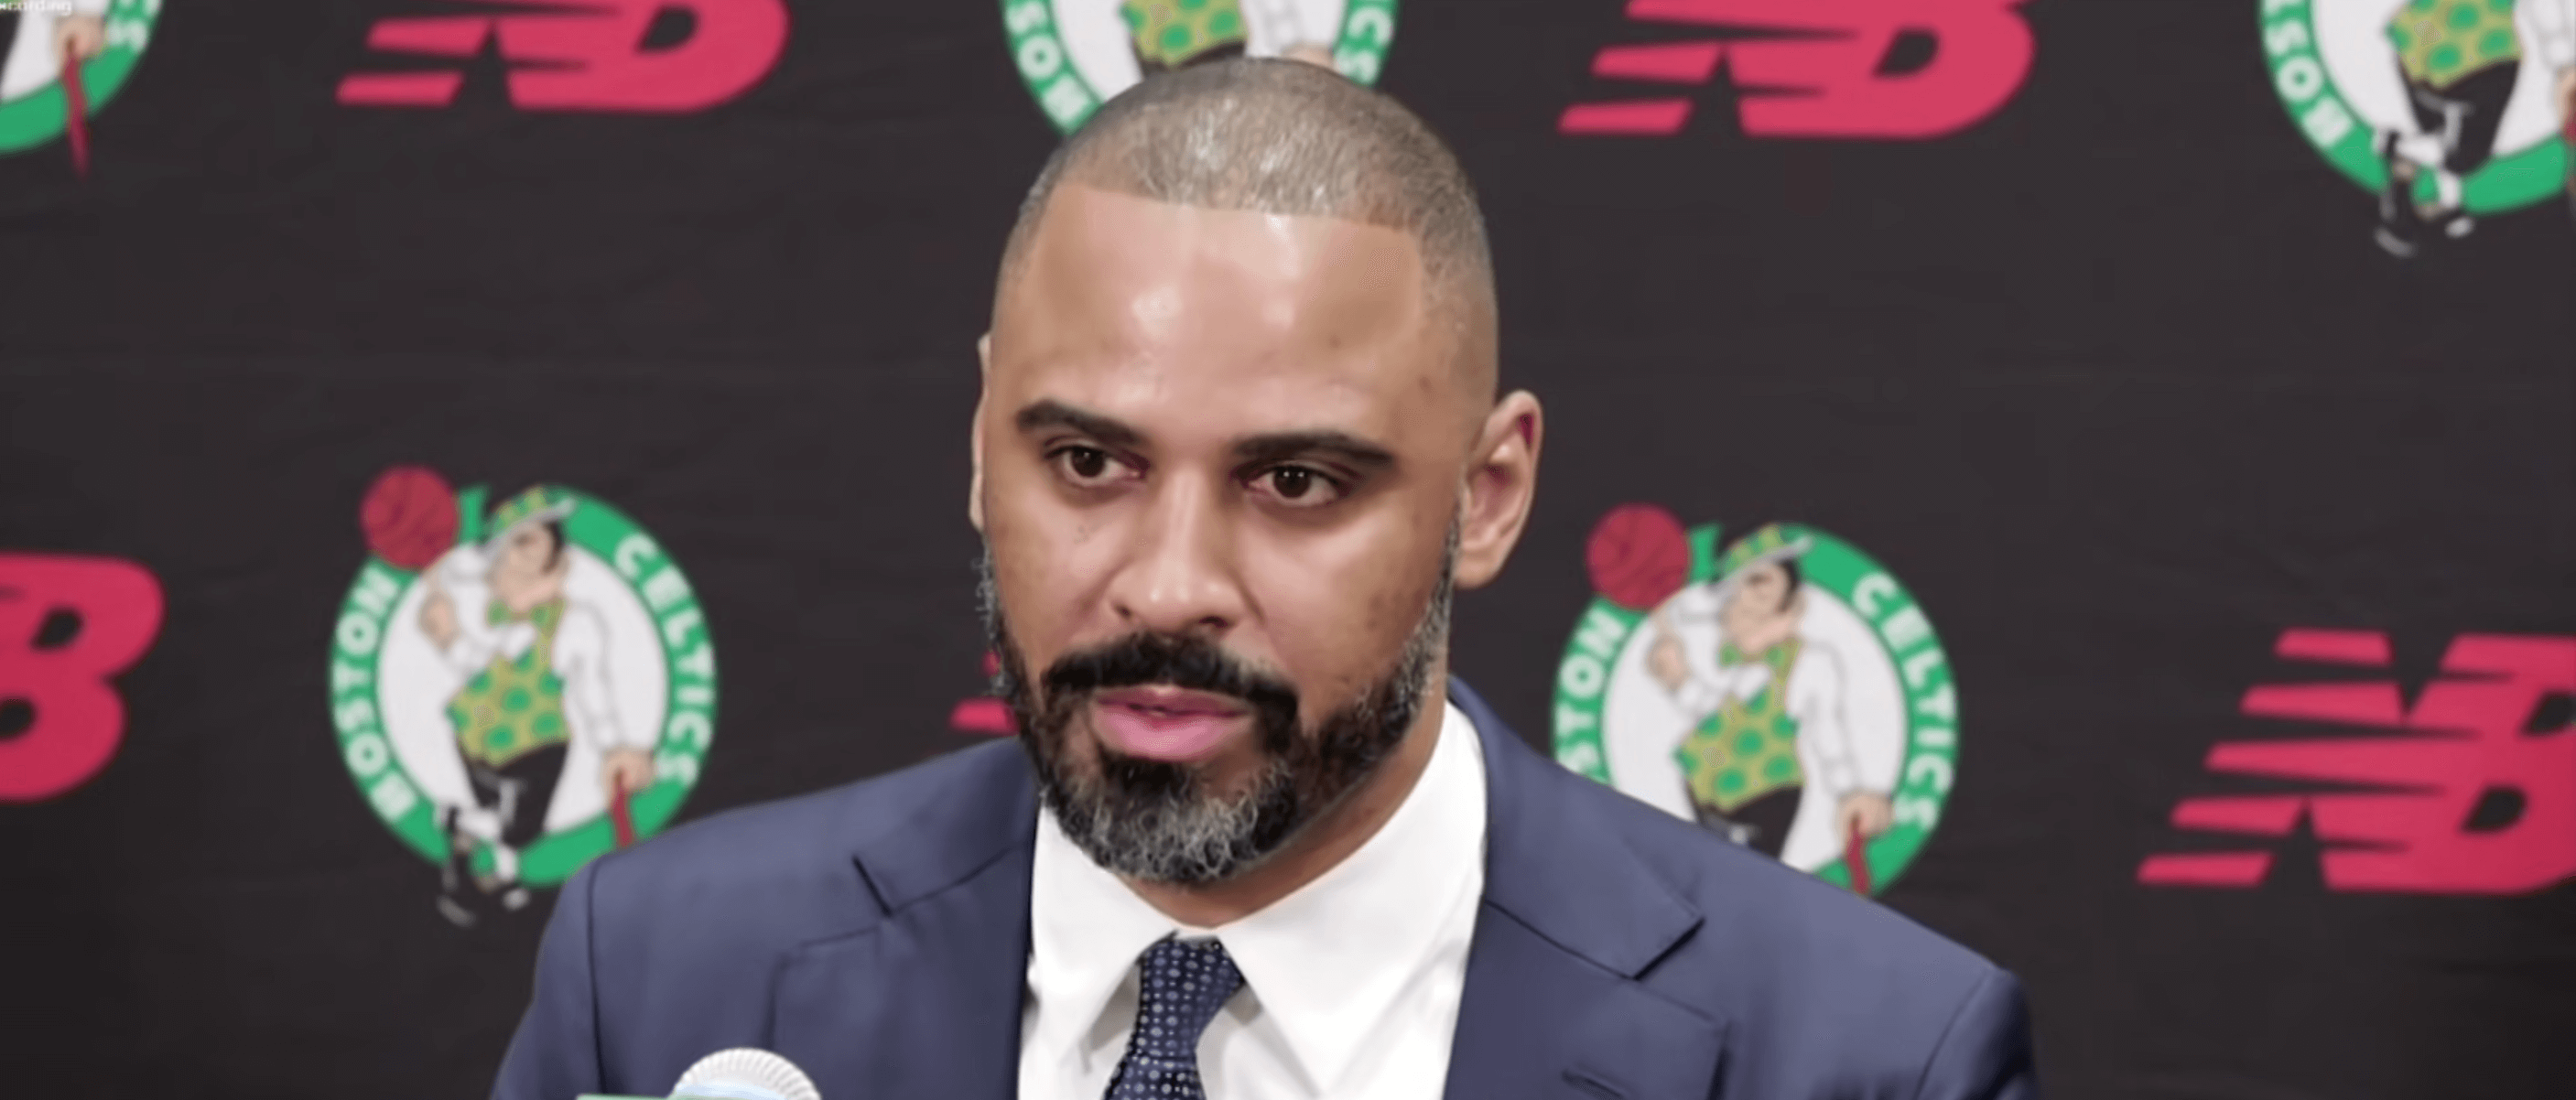 Celtics consider suspending head coach Ime Udoka over relationship with  staffer: reports 